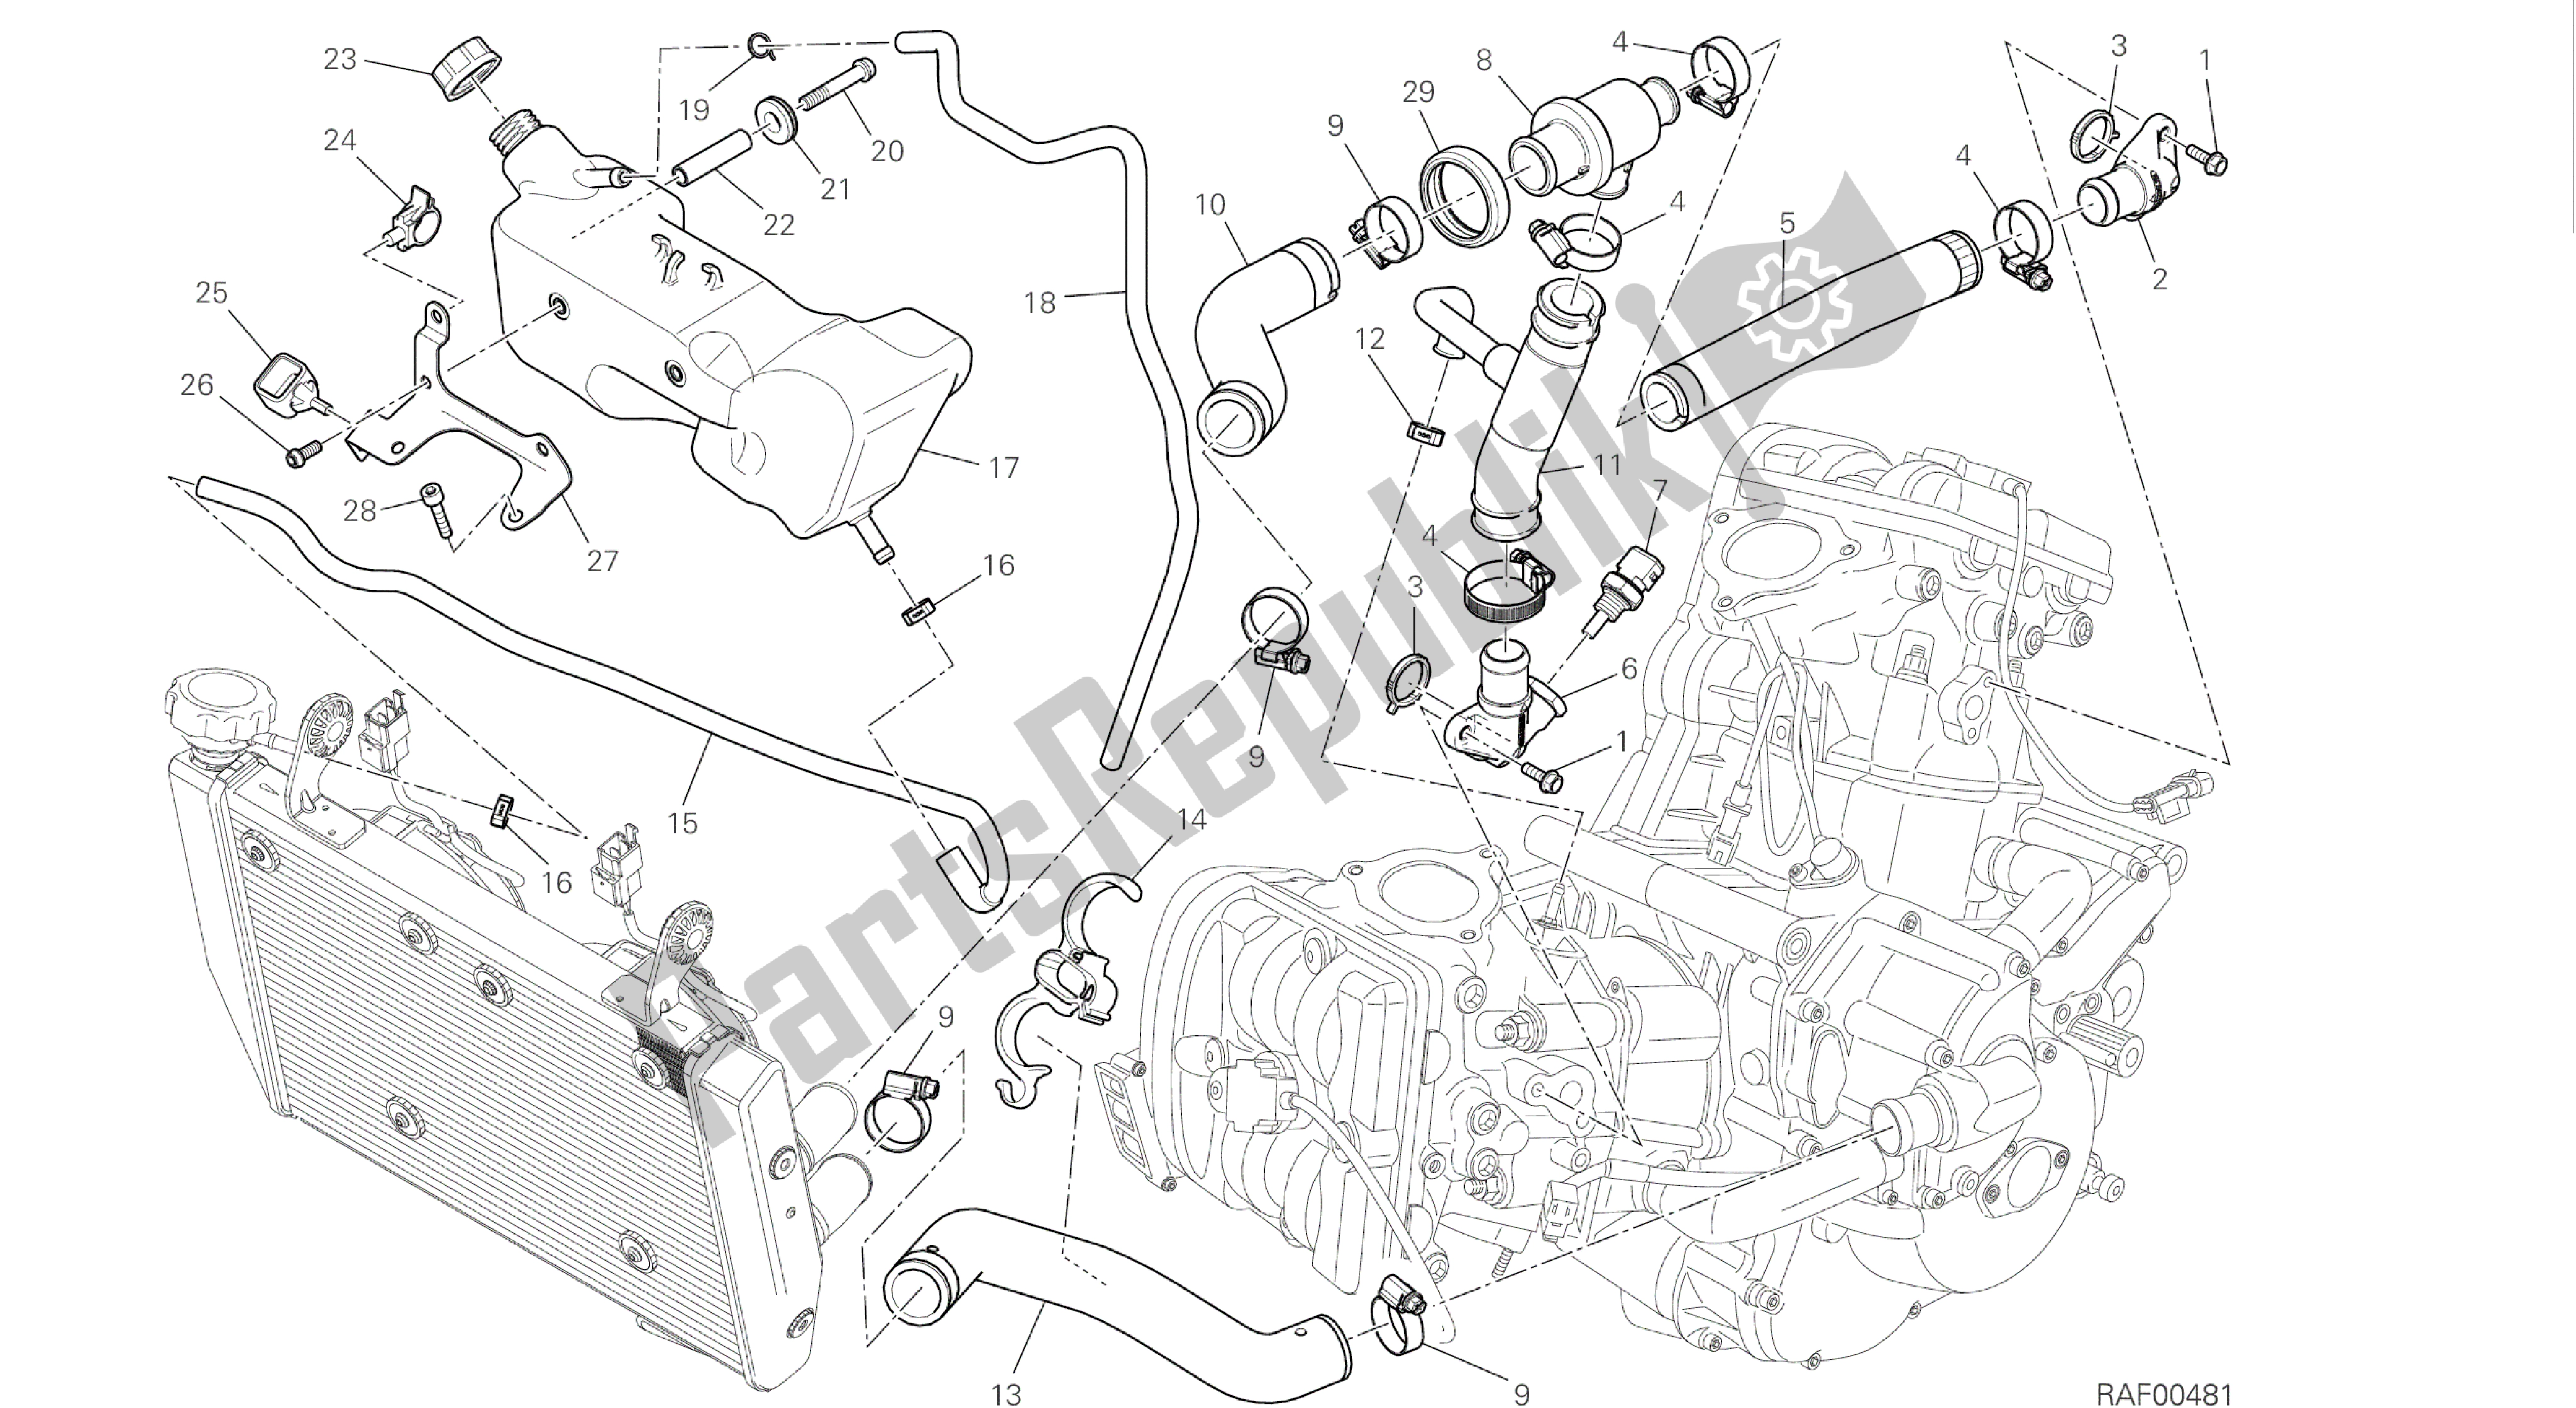 All parts for the Drawing 031 - Cooling Circuit [mod:hym-sp;xst:aus,eur,fra,jap,twn]group Frame of the Ducati Hypermotard SP 821 2014